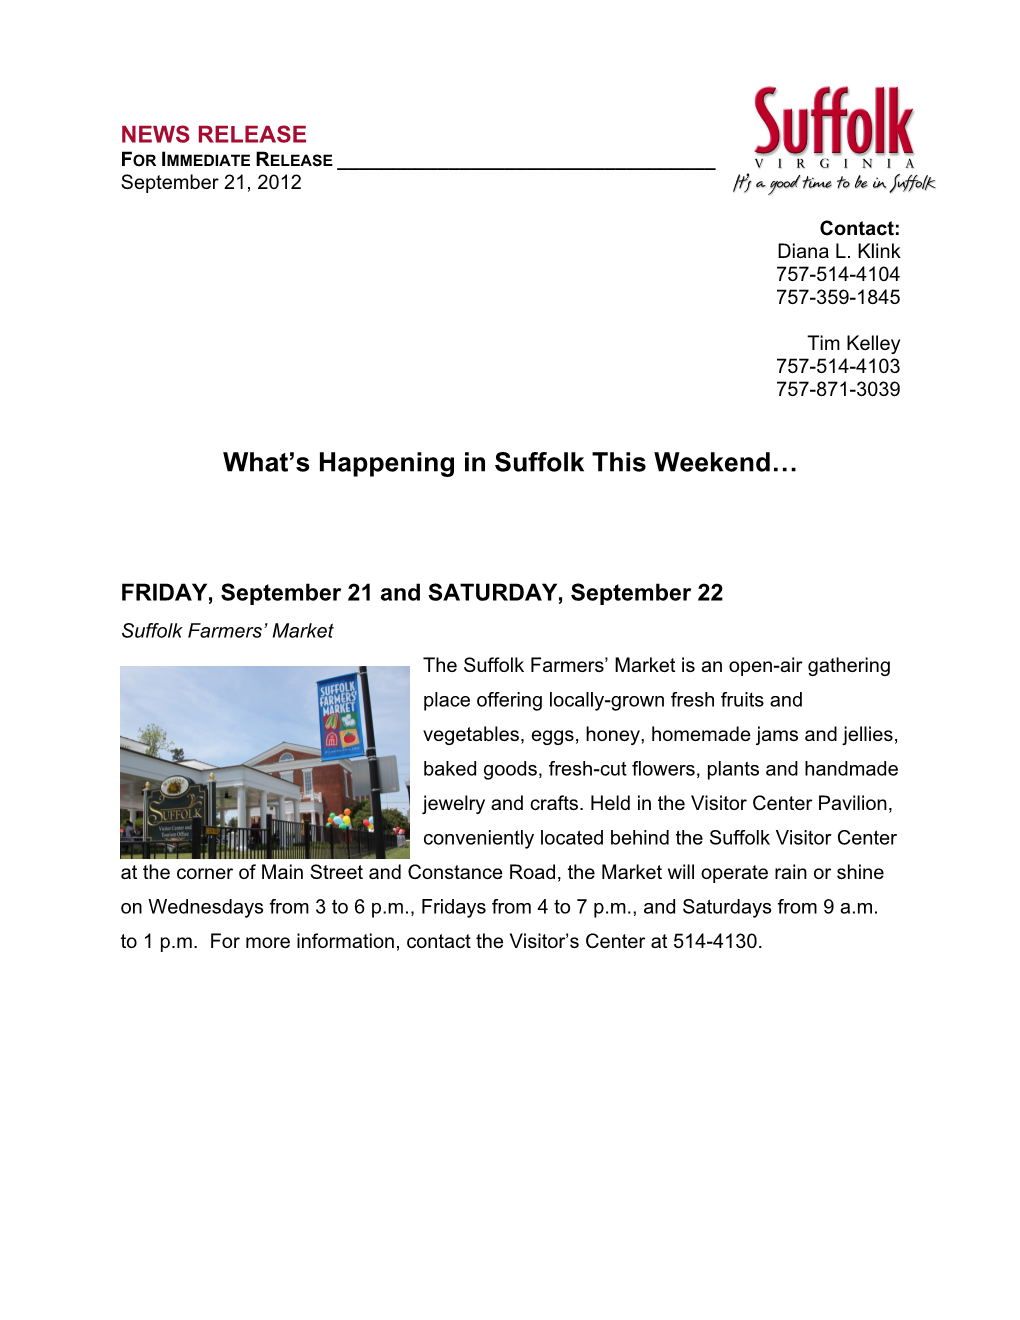 What's Happening in Suffolk This Weekend…